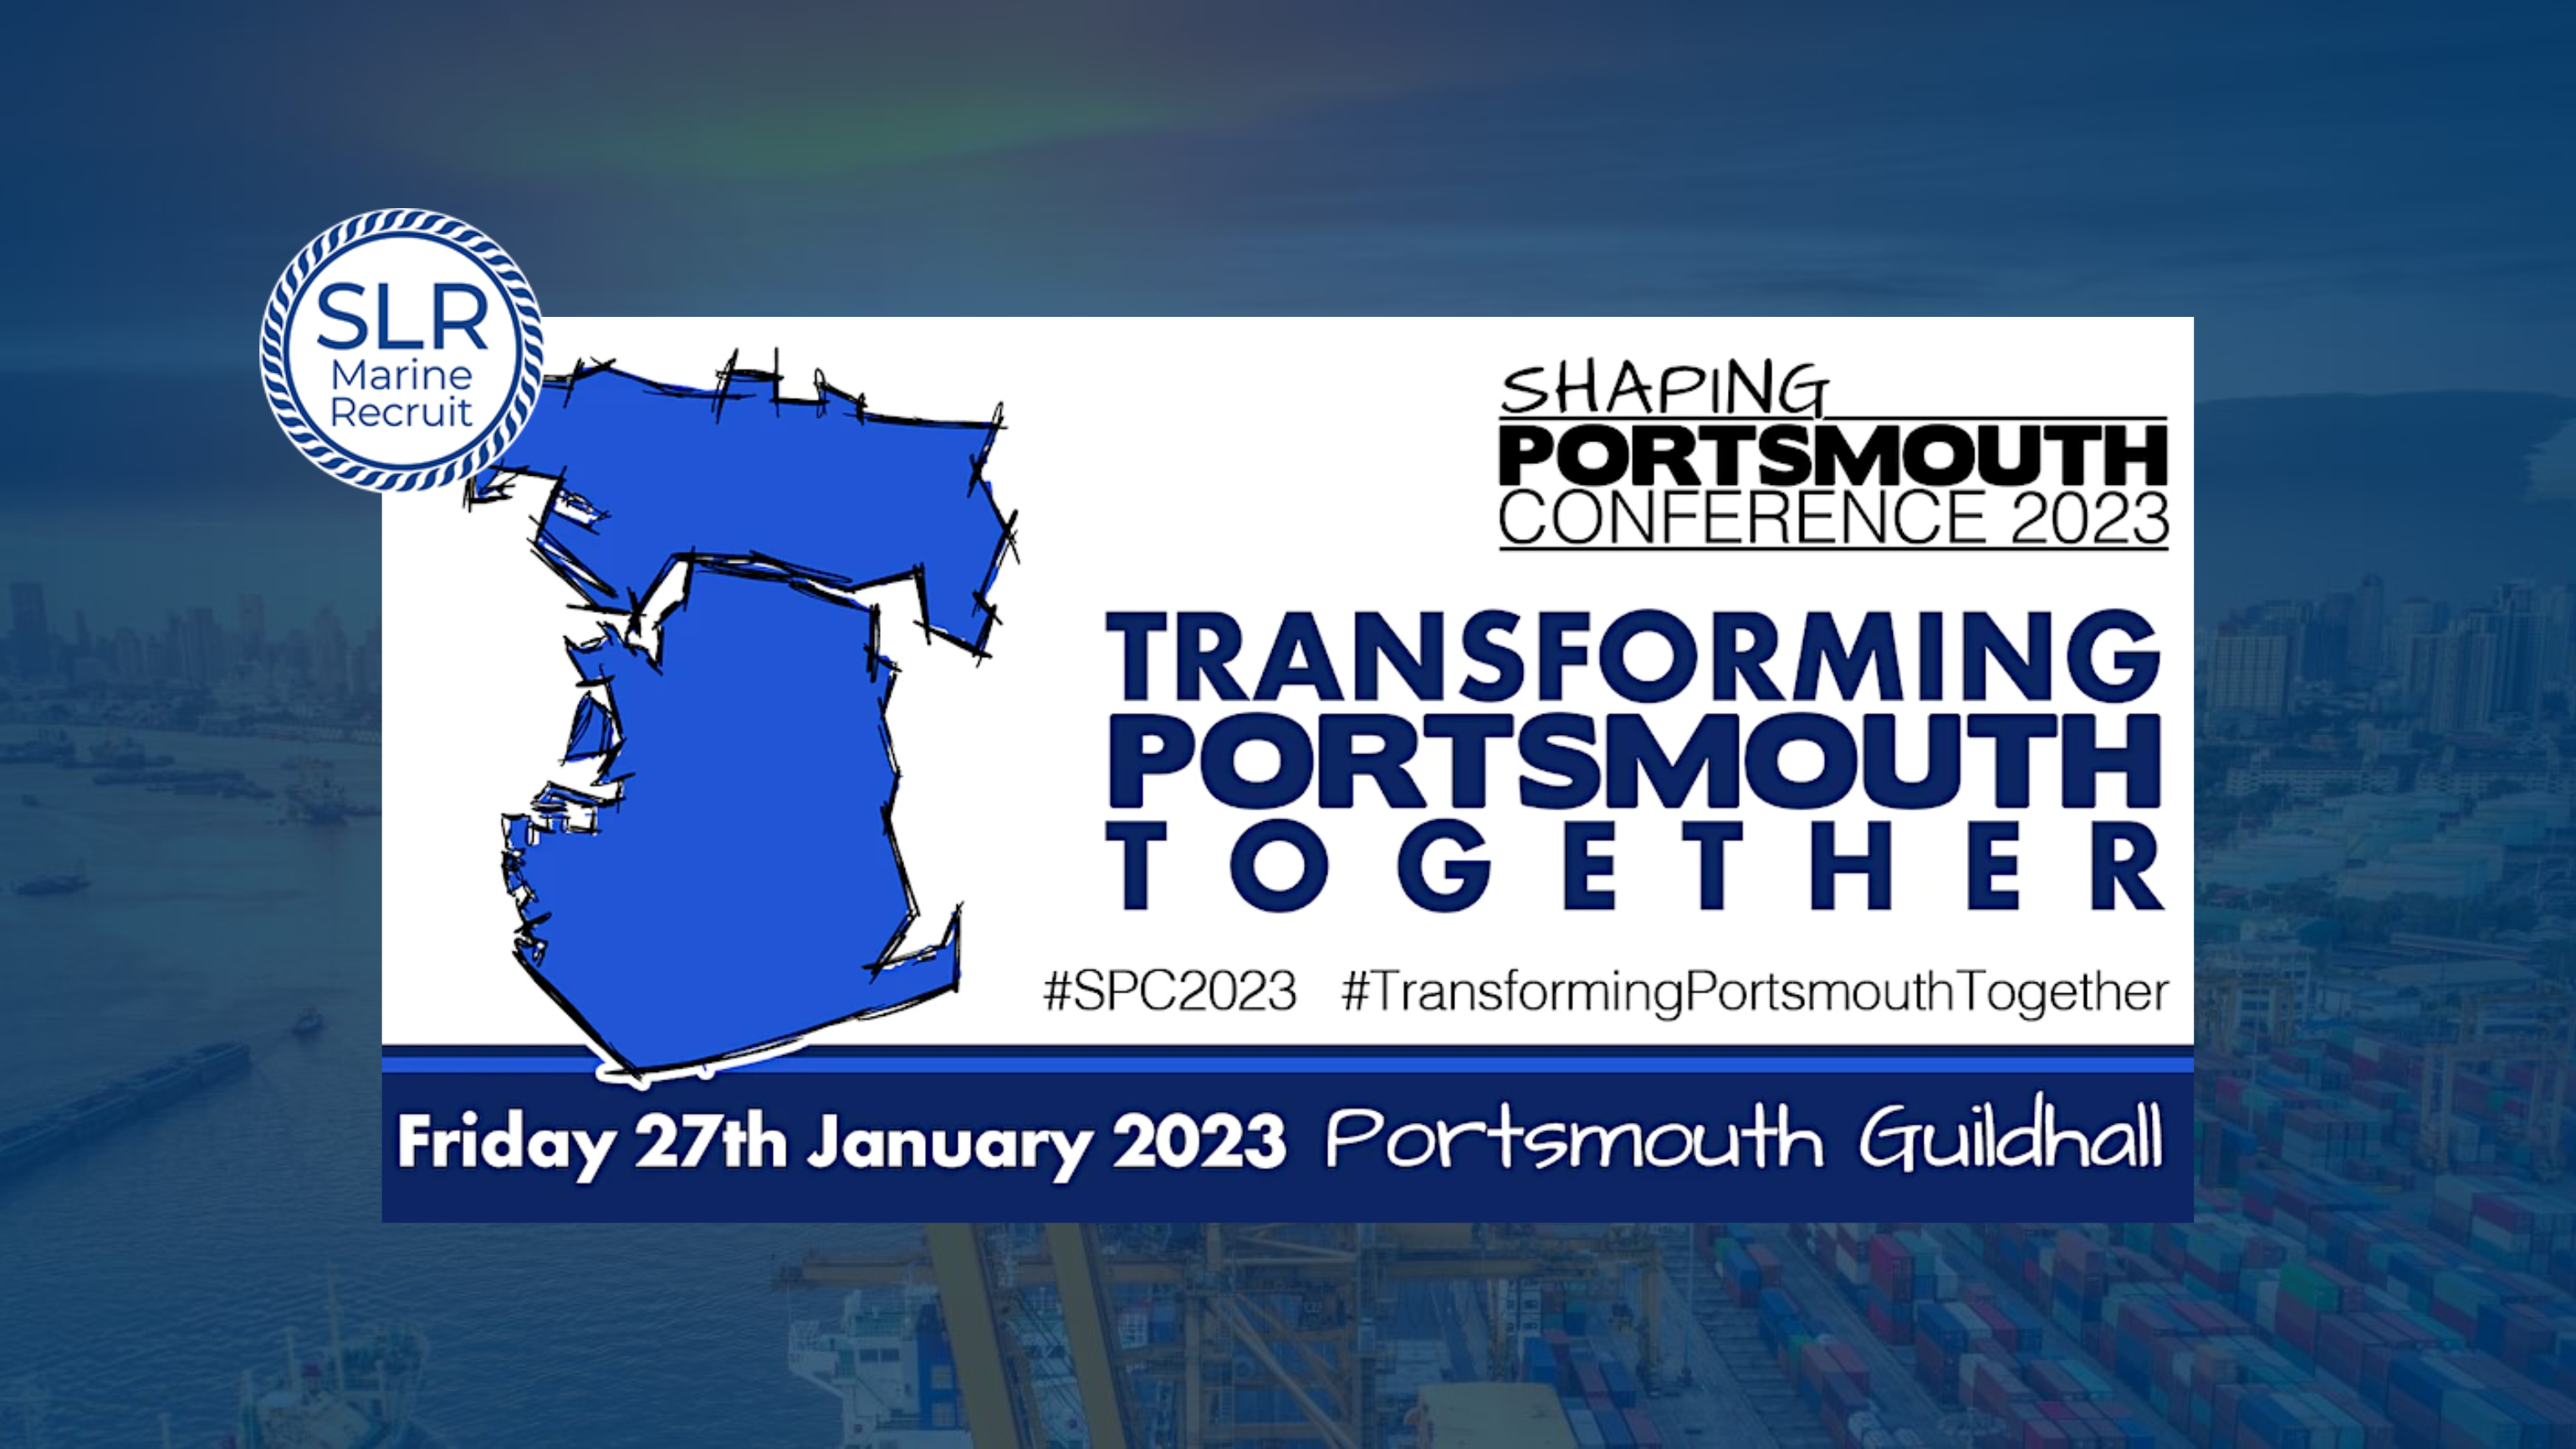 SLR participates at the Shaping Portsmouth Conference 2023[2]